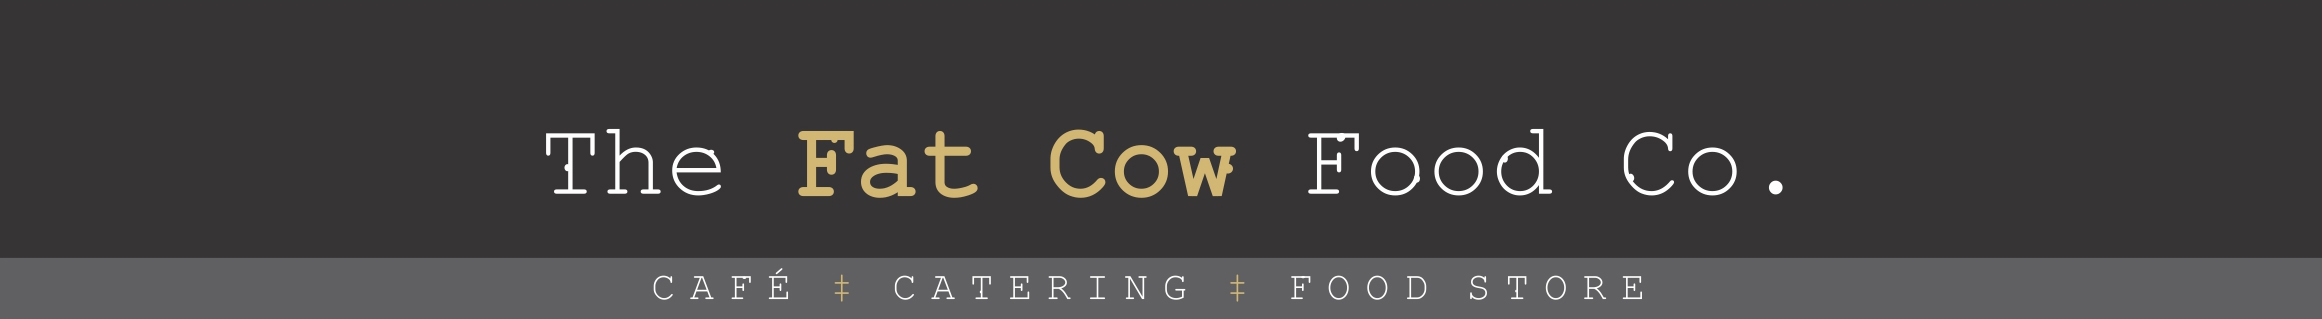 The Fat Cow Food Co